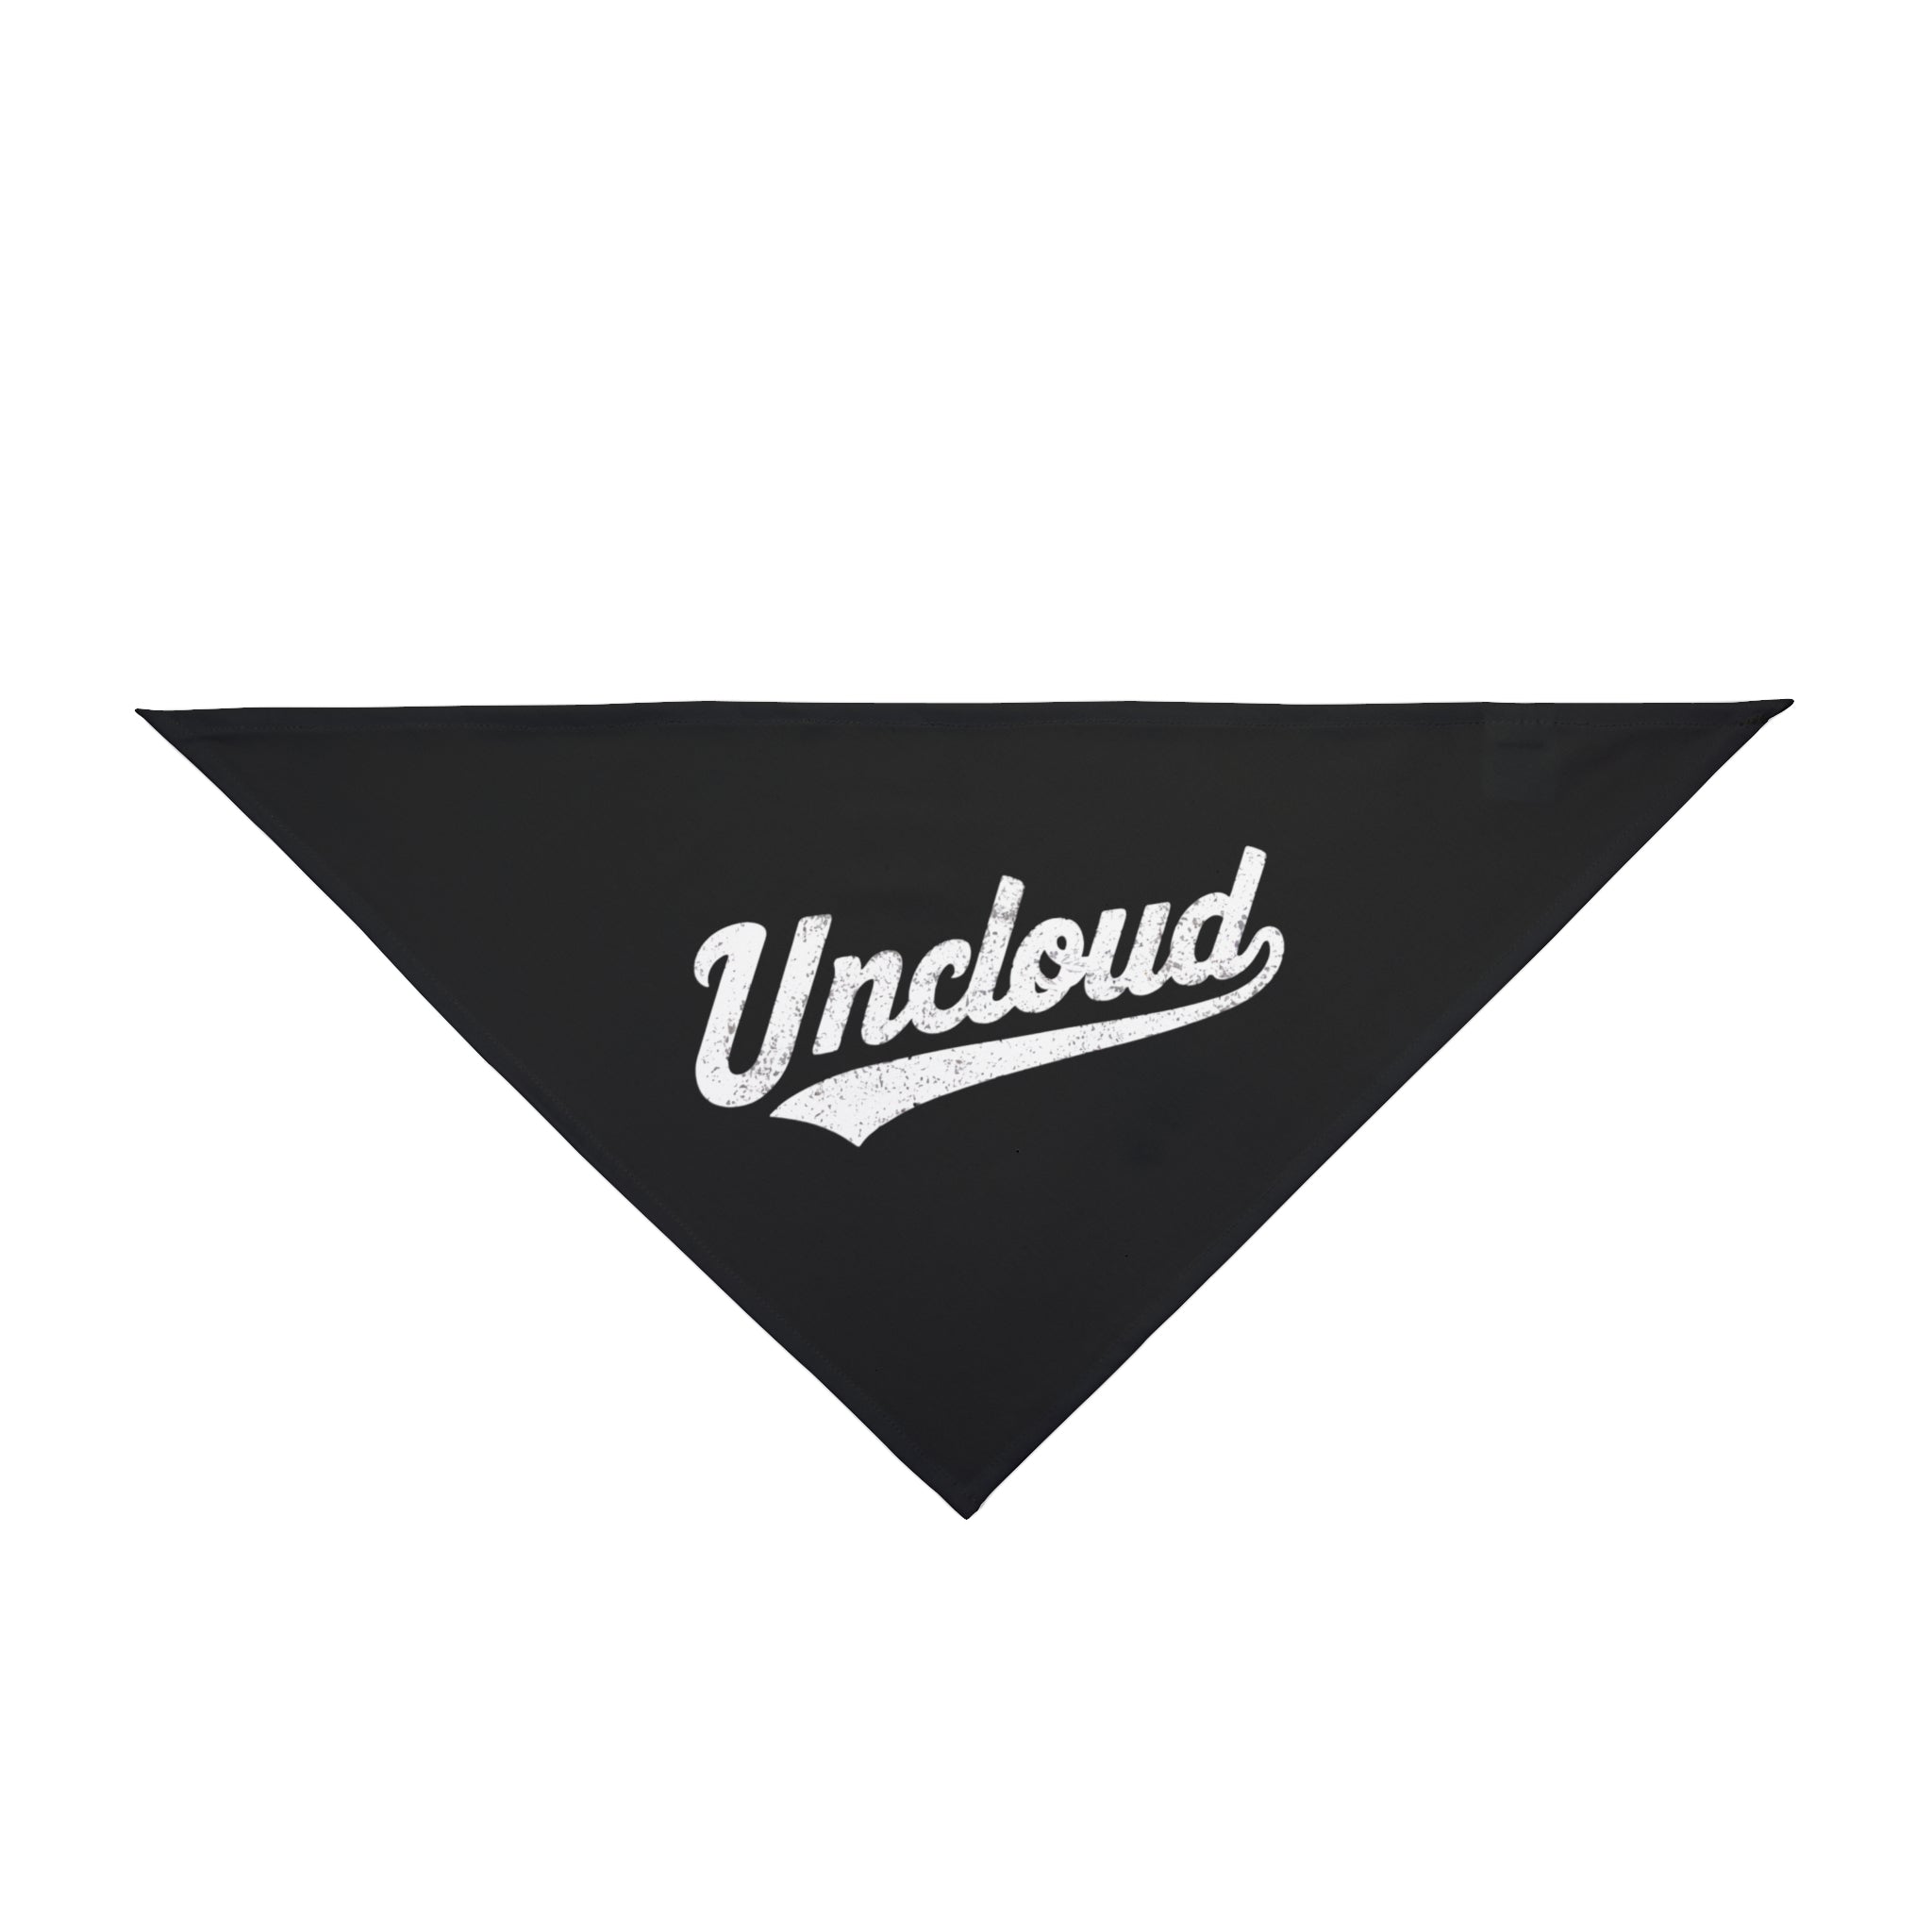 A black triangular Uncloud - Pet Bandana made from soft-spun polyester, featuring the word 'Uncloud' in white cursive text at its center, ensuring both style and pet comfort.